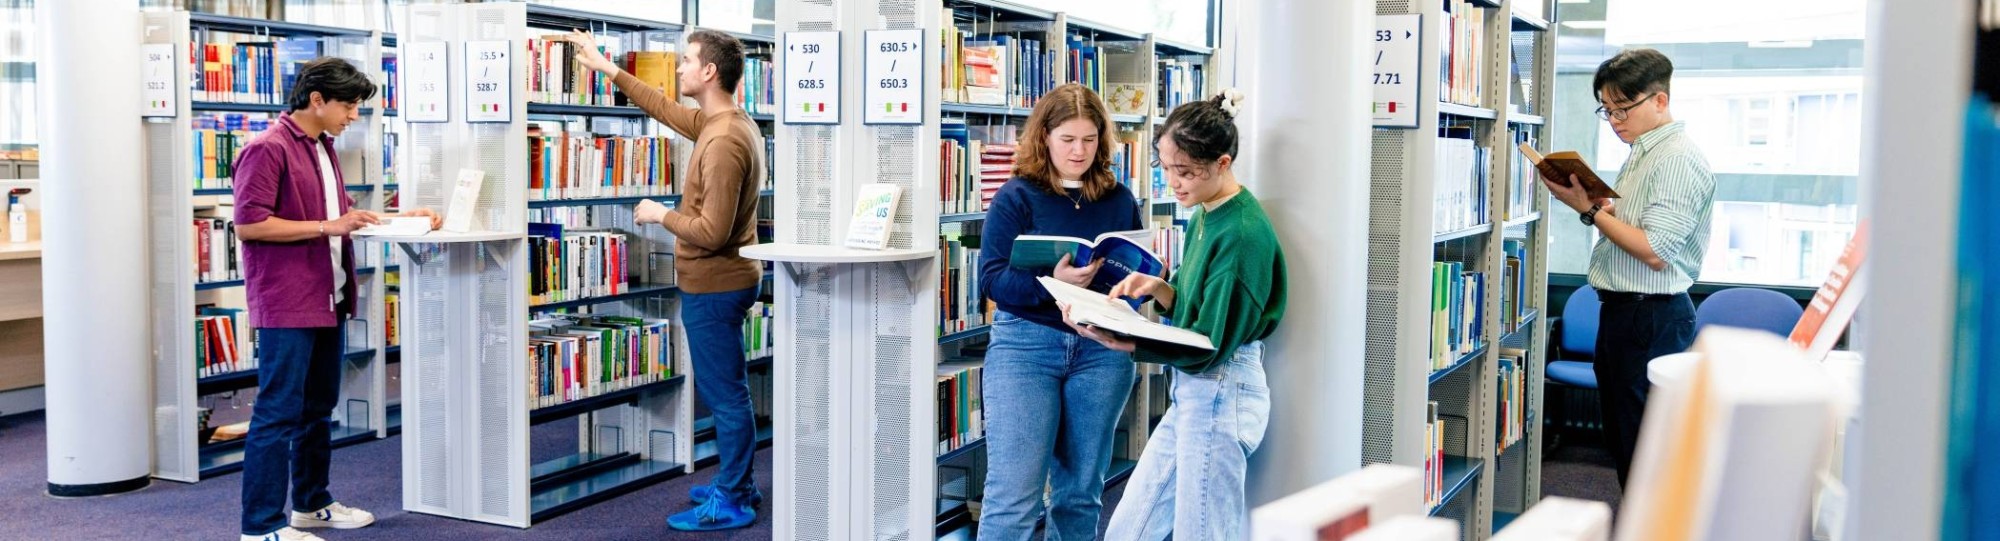 International students browsing through study books in the library on the Arnhem campus of HAN University of Applied Sciences.